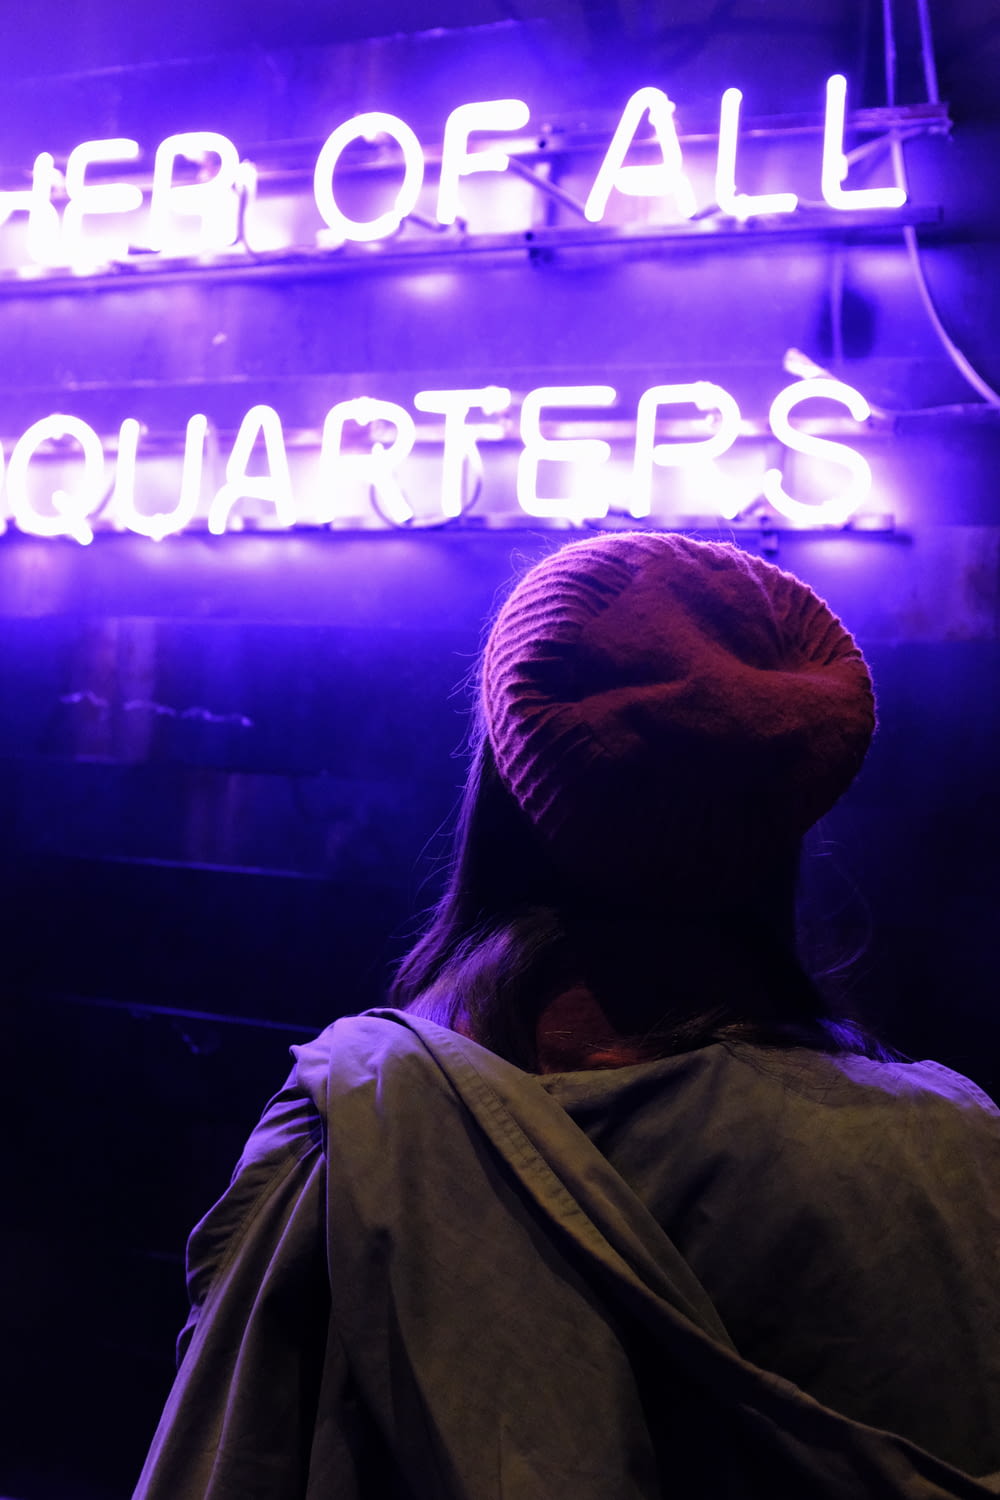 person wearing maroon knit cap in front of neon light signage